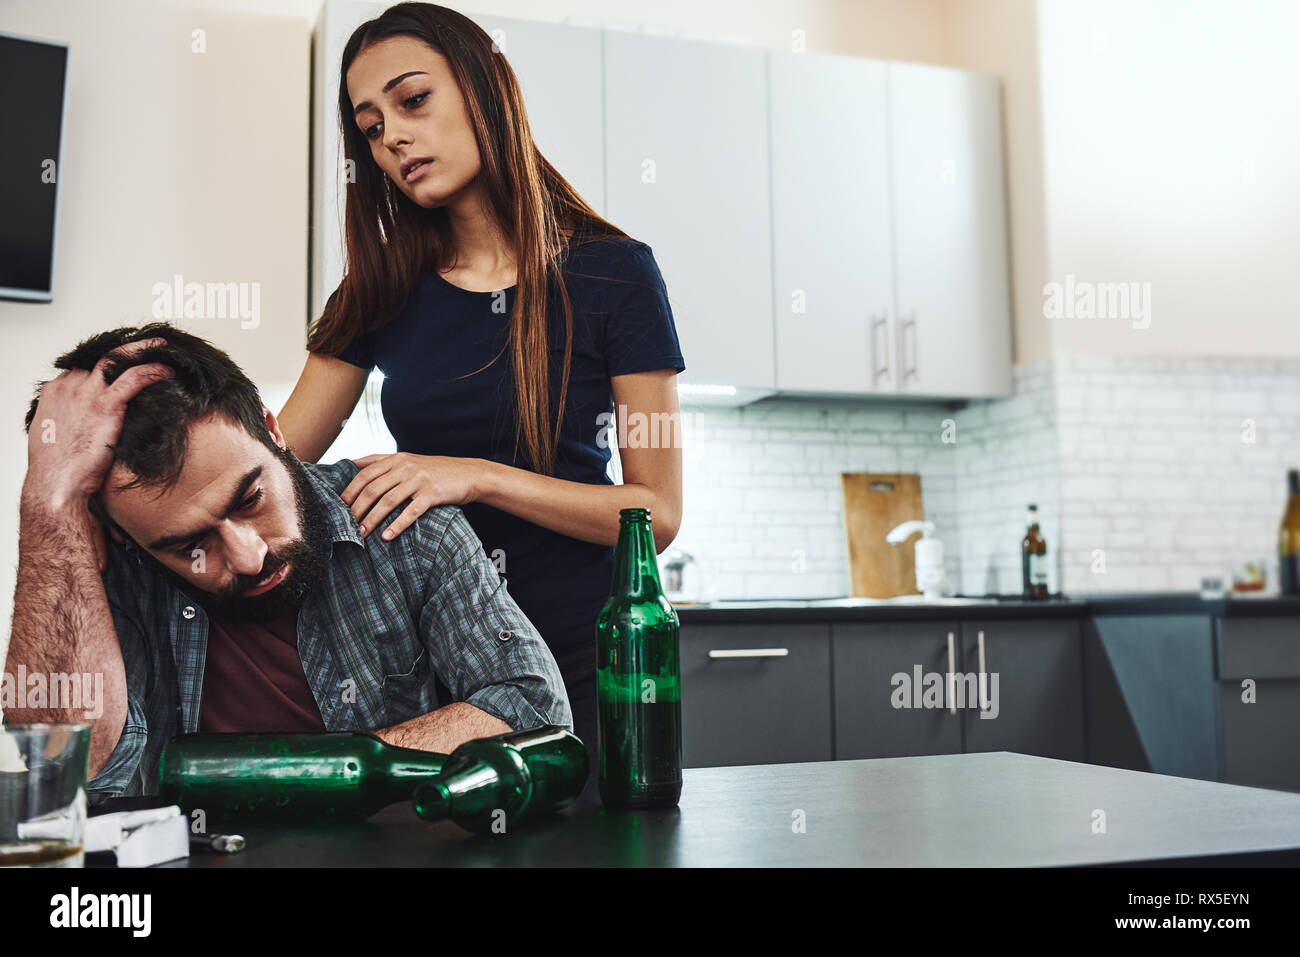 Drunk husband. Dark-haired addicted woman feeling despair while standing near her drunk husband. He is sitting in the kitchen, wasted. Empty bottles a Stock Photo